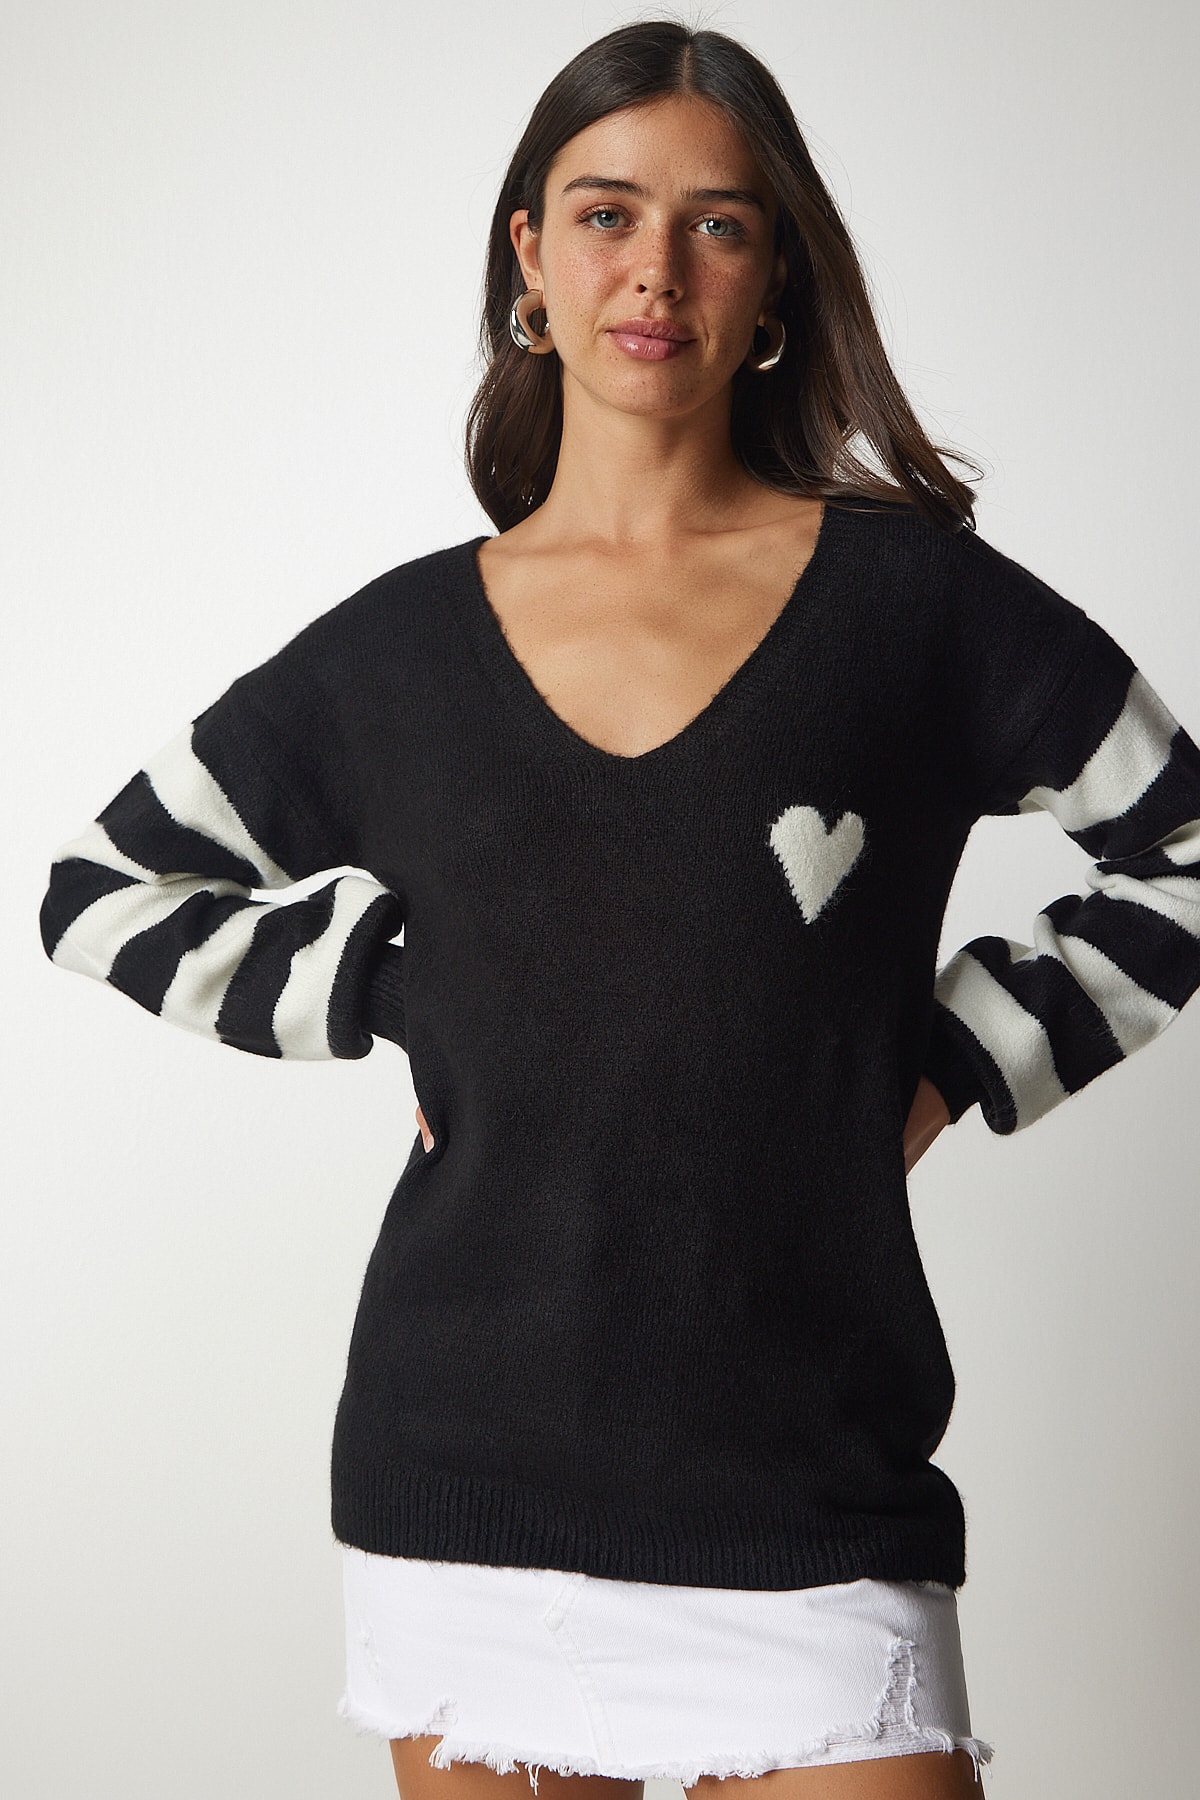 Happiness İstanbul Women's Black And White Color Block V-Neck Knitwear Sweater